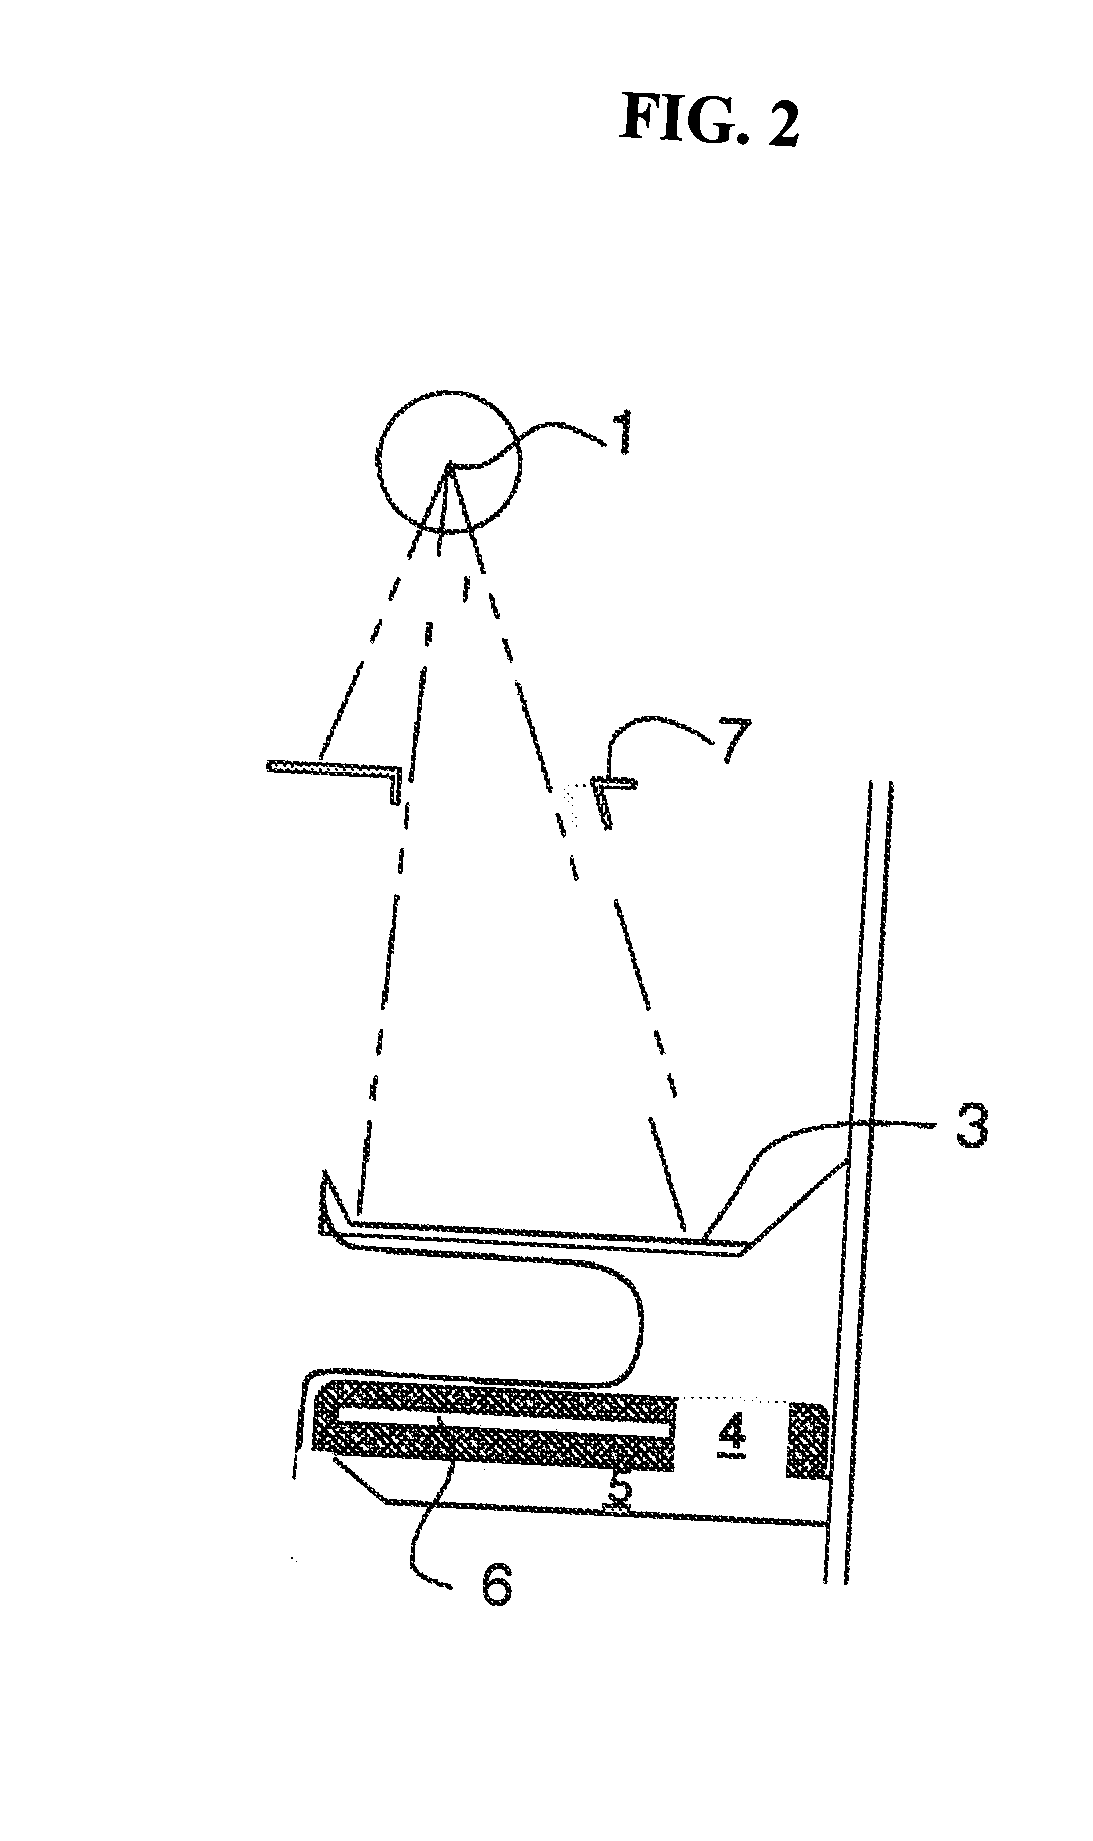 Mammography systems and methods, including methods utilizing breast sound comparision